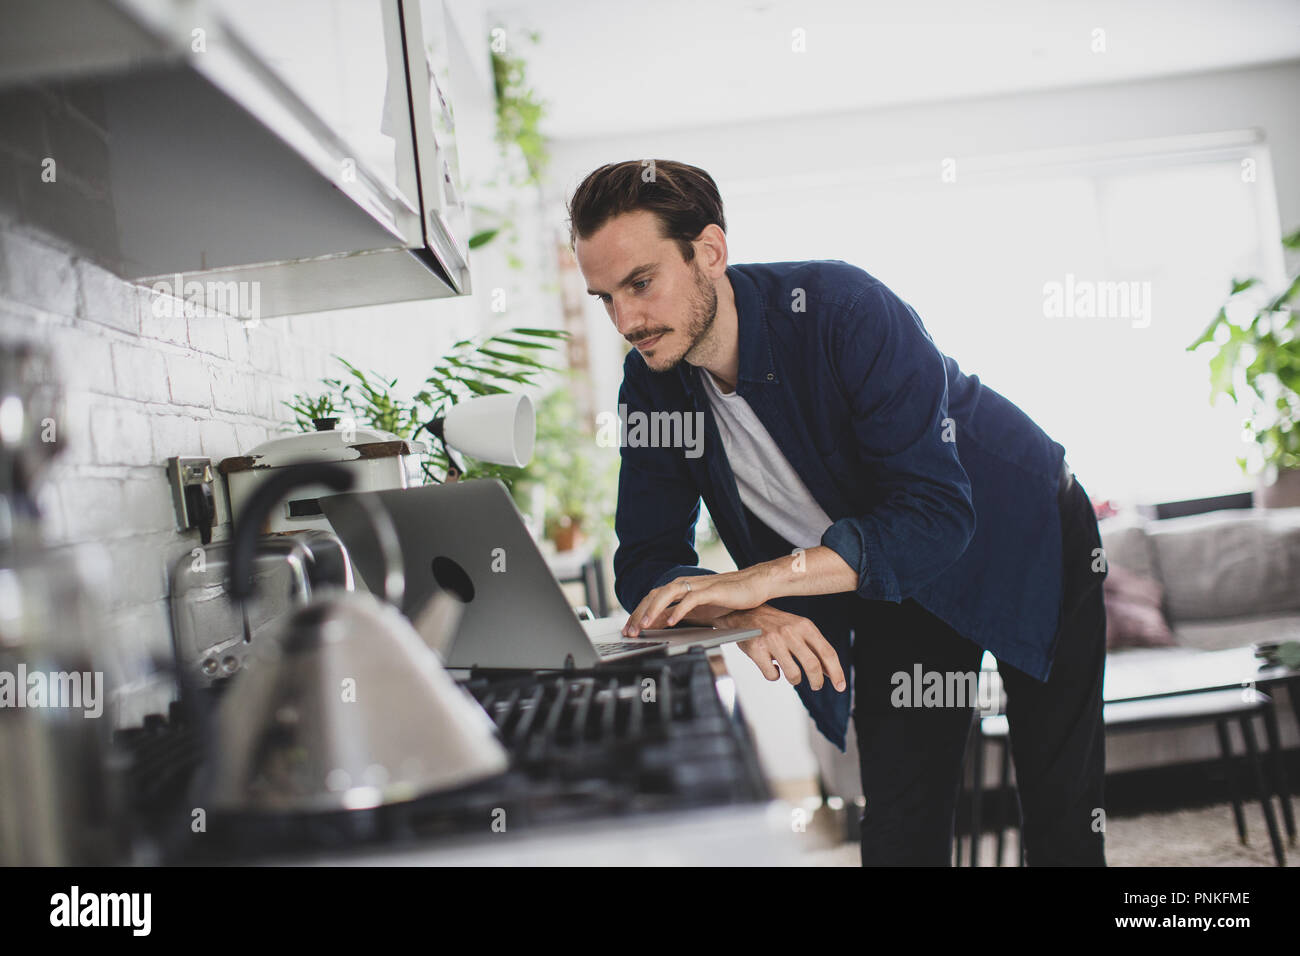 Adult male working from home in kitchen Stock Photo